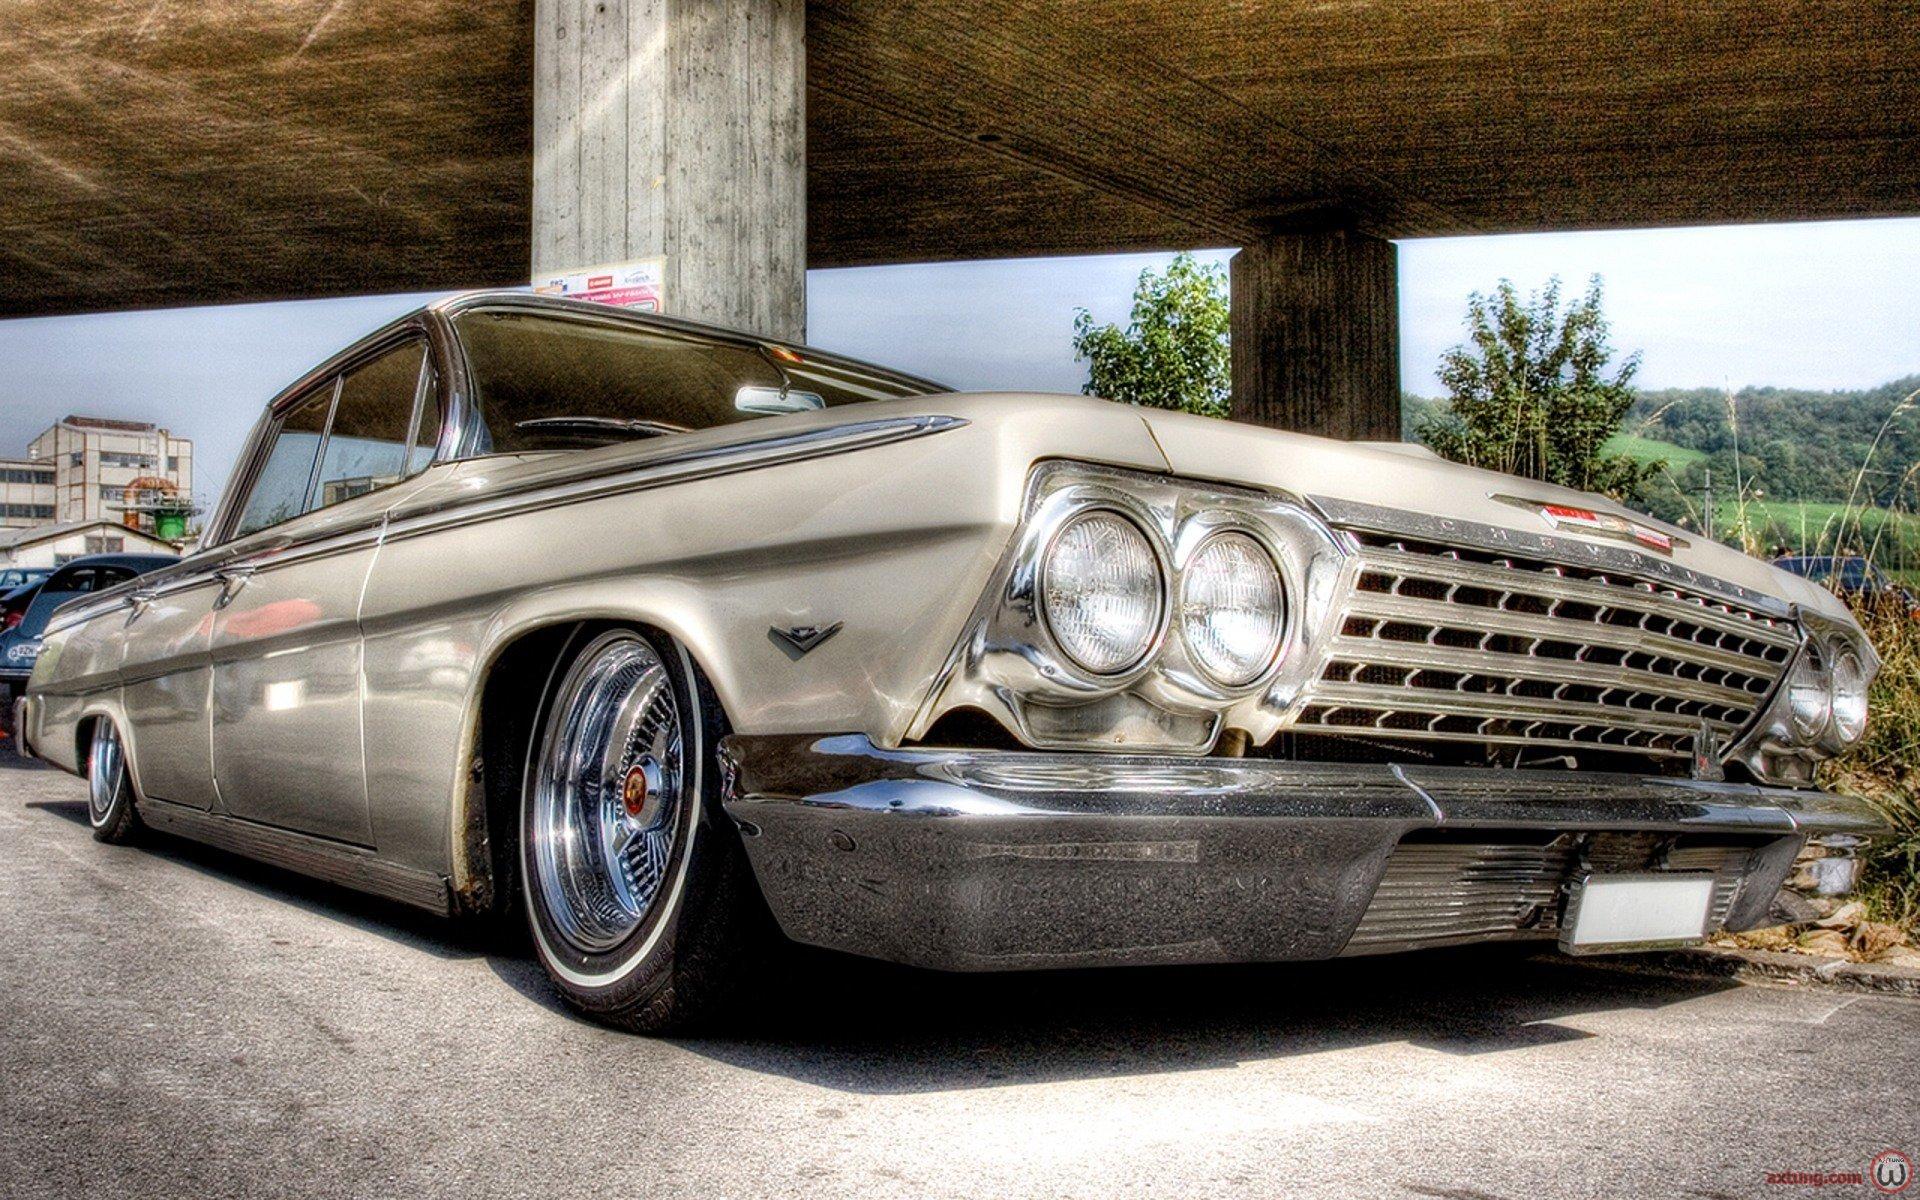 lowrider, Lowriders, Custom, Auto, Car, Cars, Vehicle, Vehicles, Automobile, Automobiles, Hdr Wallpaper